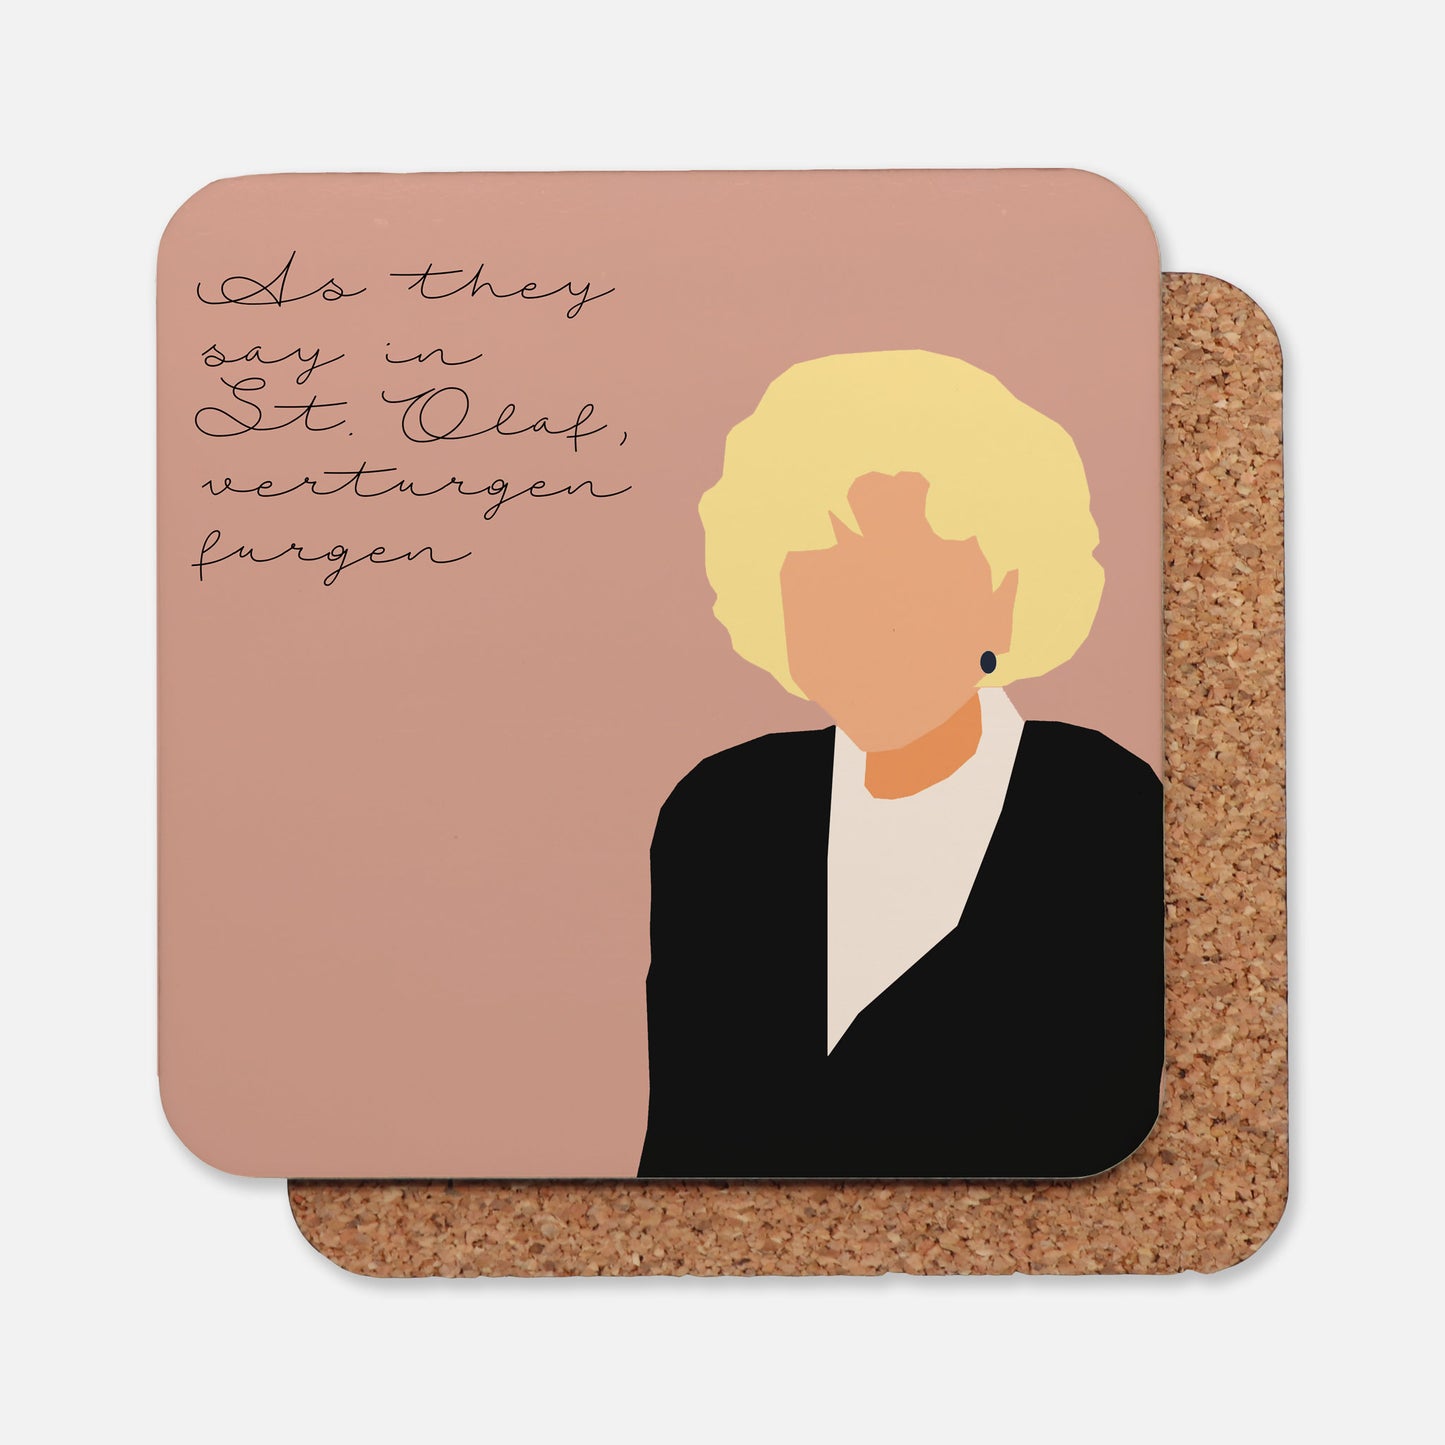 Rose Nylund Coaster with Quote "As they say in St. Olaf, verturgen furgen"